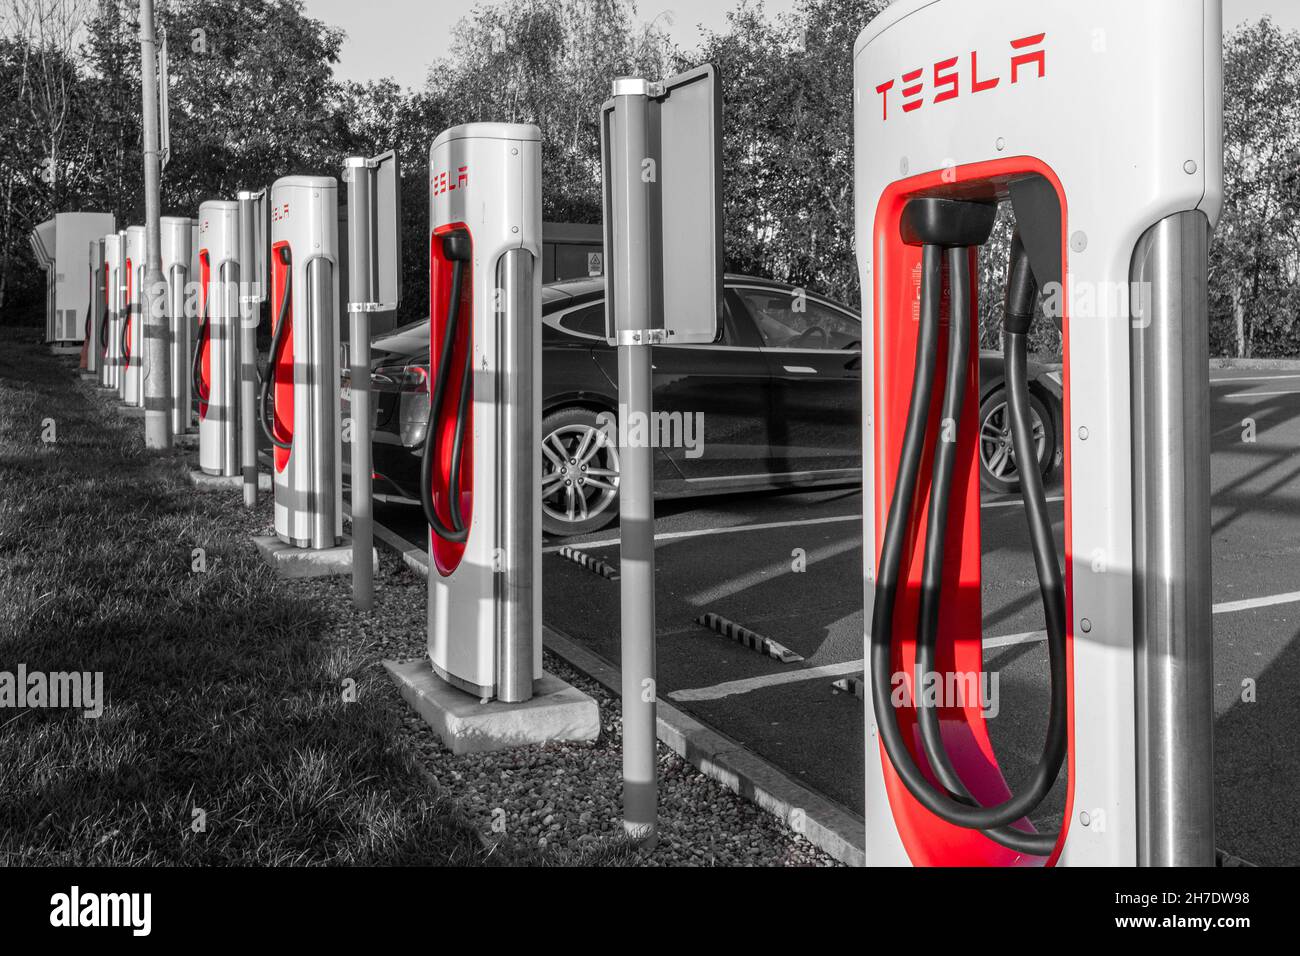 Tesla Supercharger station for charging electric cars vehicles at Telford Motorway Services, Shropshire, England, UK. Monochrome with colour splash Stock Photo